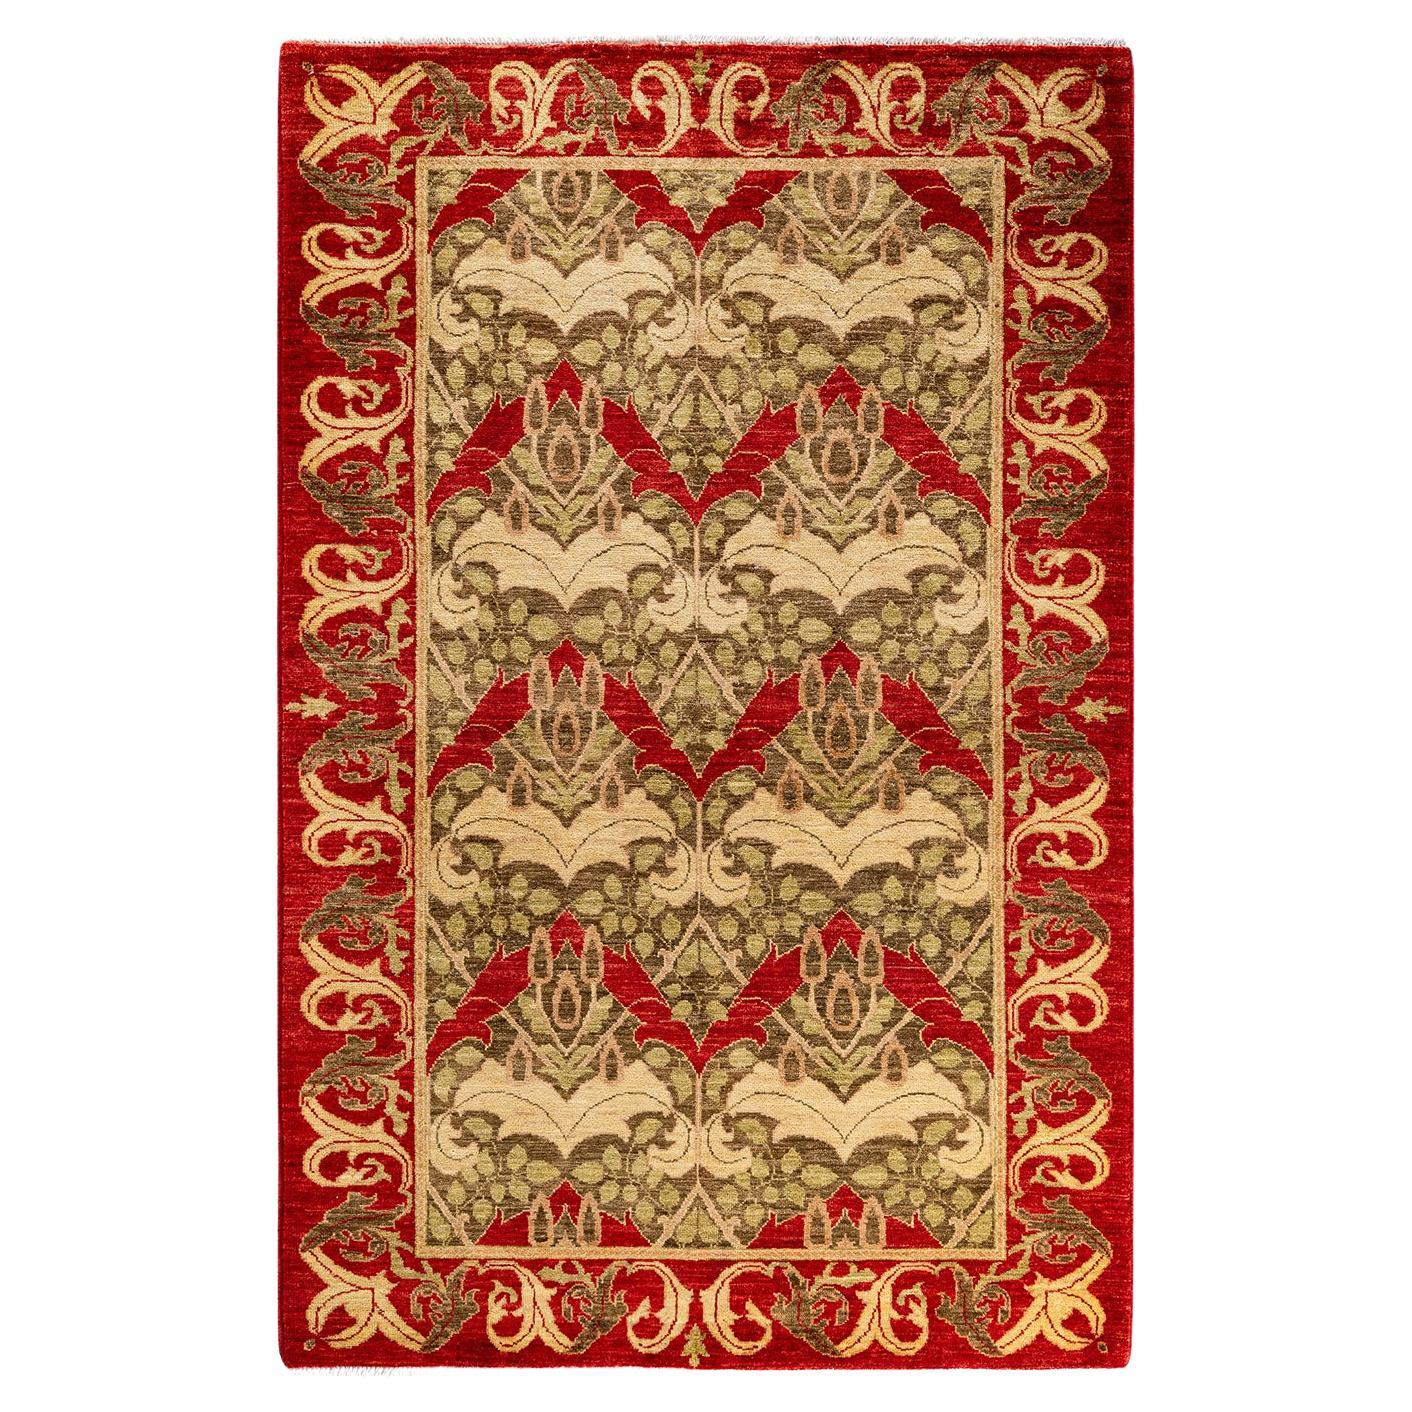 Contemporary Arts & Crafts Hand Knotted Wool Gold Area Rug 